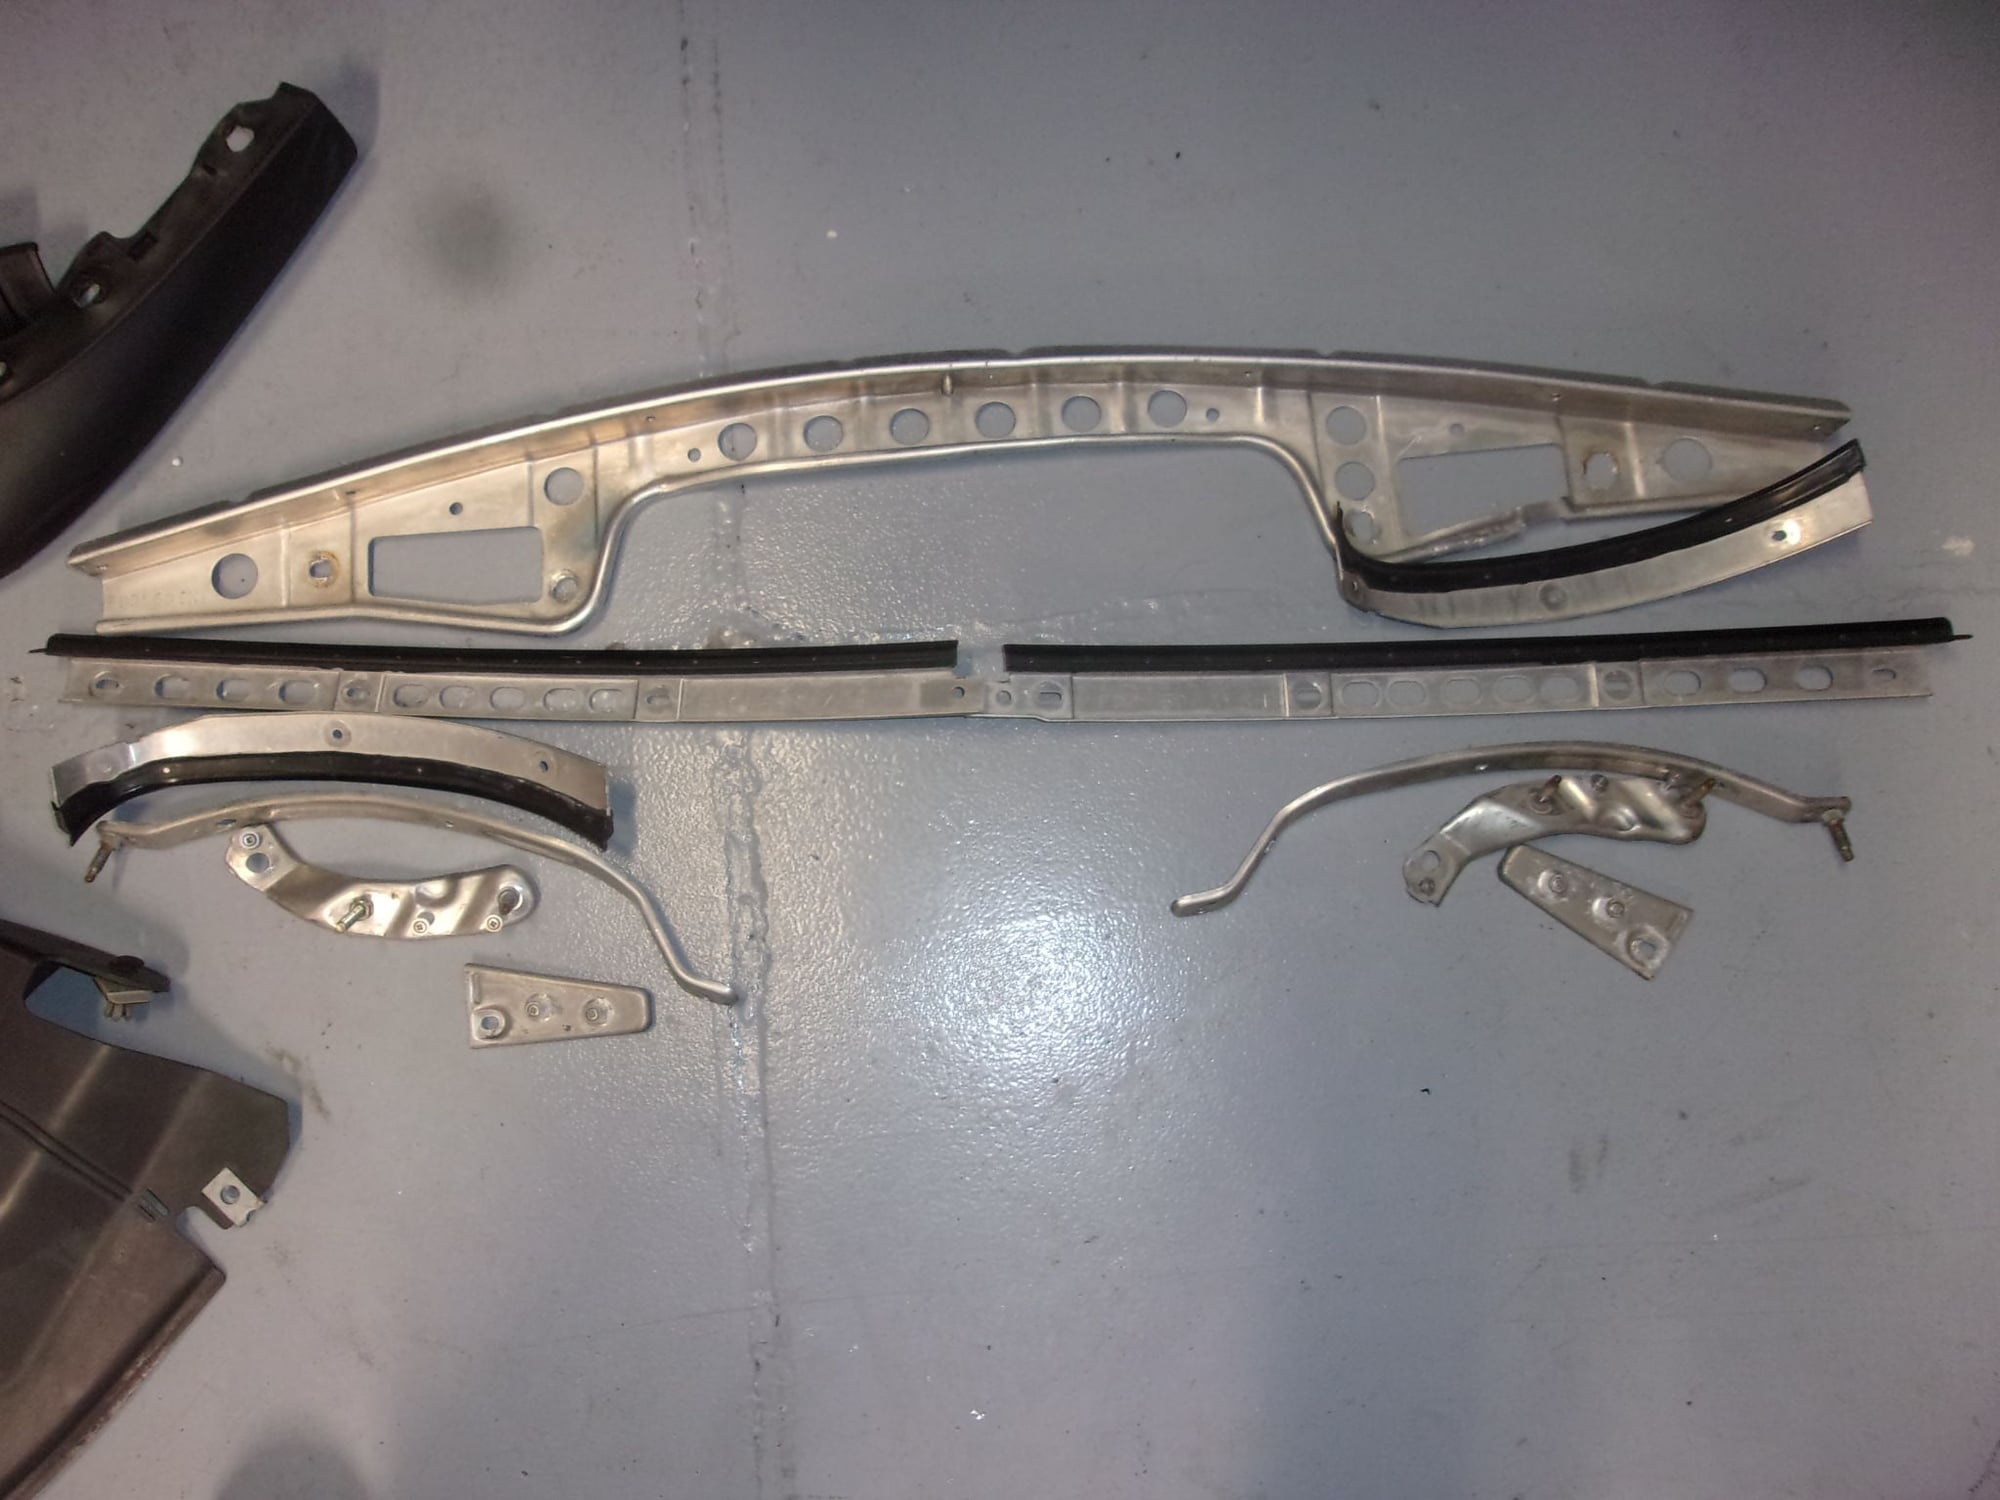 Miscellaneous - HARD-TO-FIND Parts #11 - Used - 1993 to 1995 Mazda RX-7 - Murfreesboro, TN 37130, United States